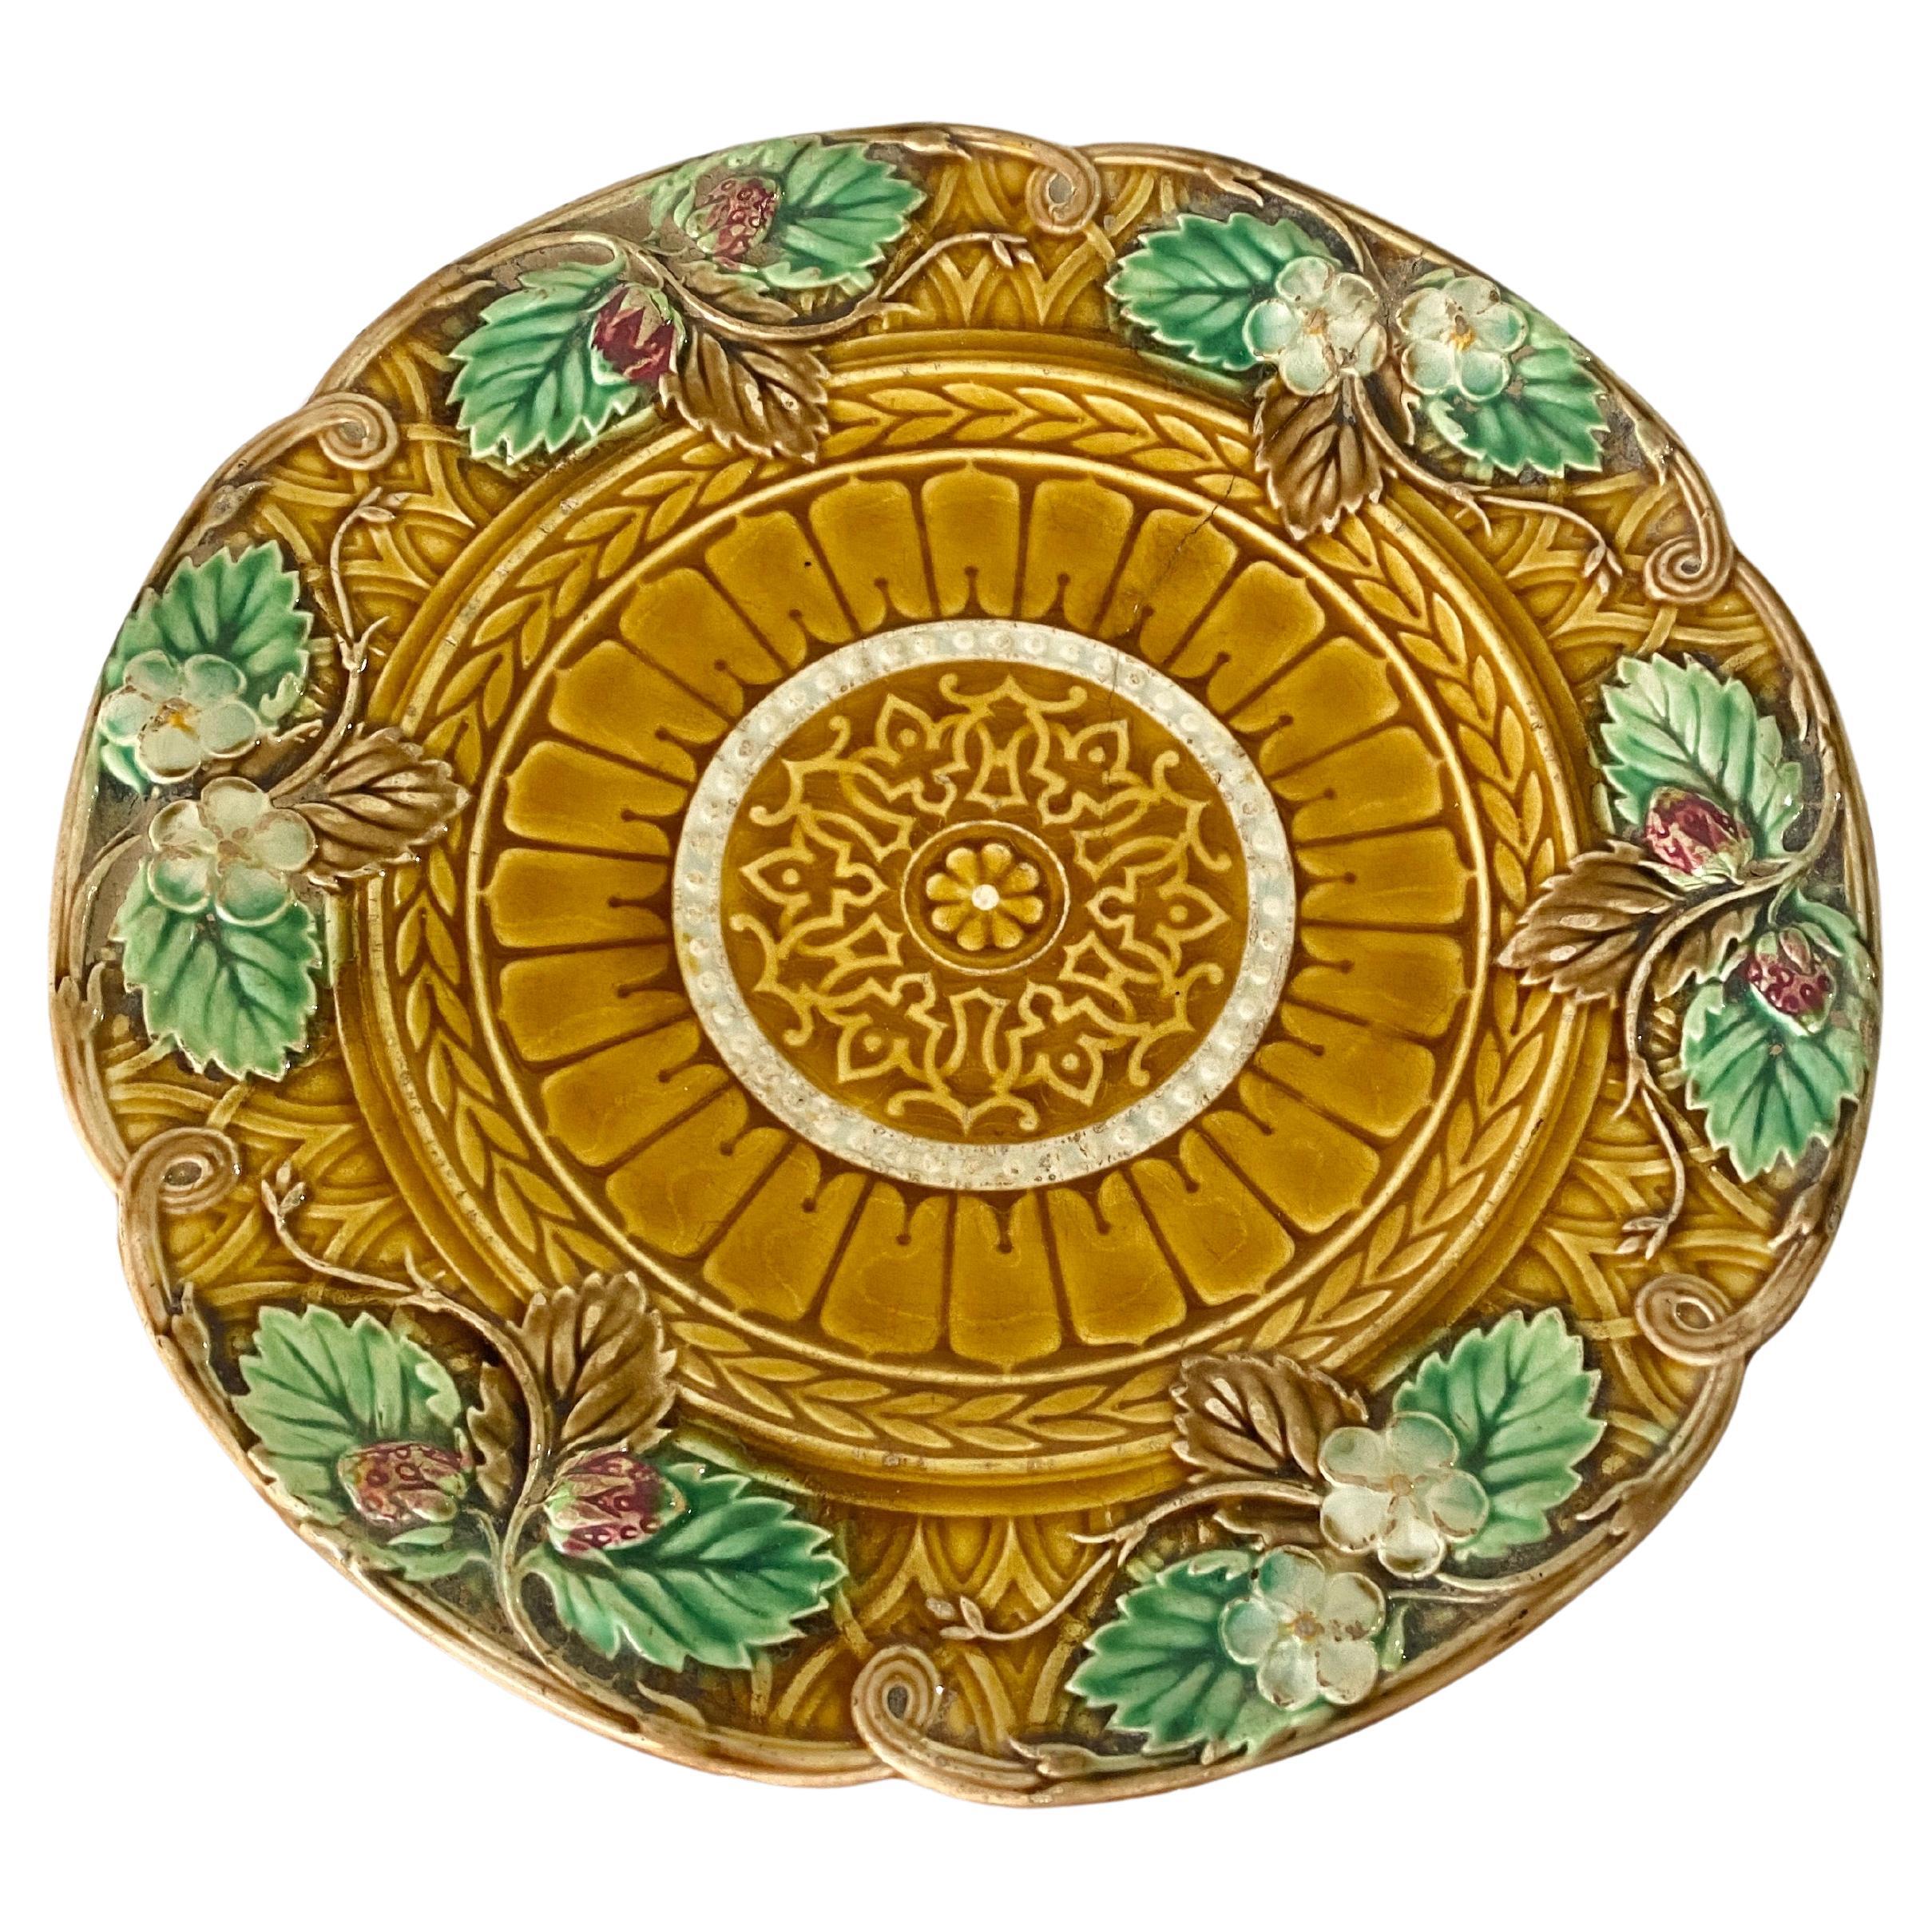 Majolica Plate by Sarreguemines, Faience 19th Century, France